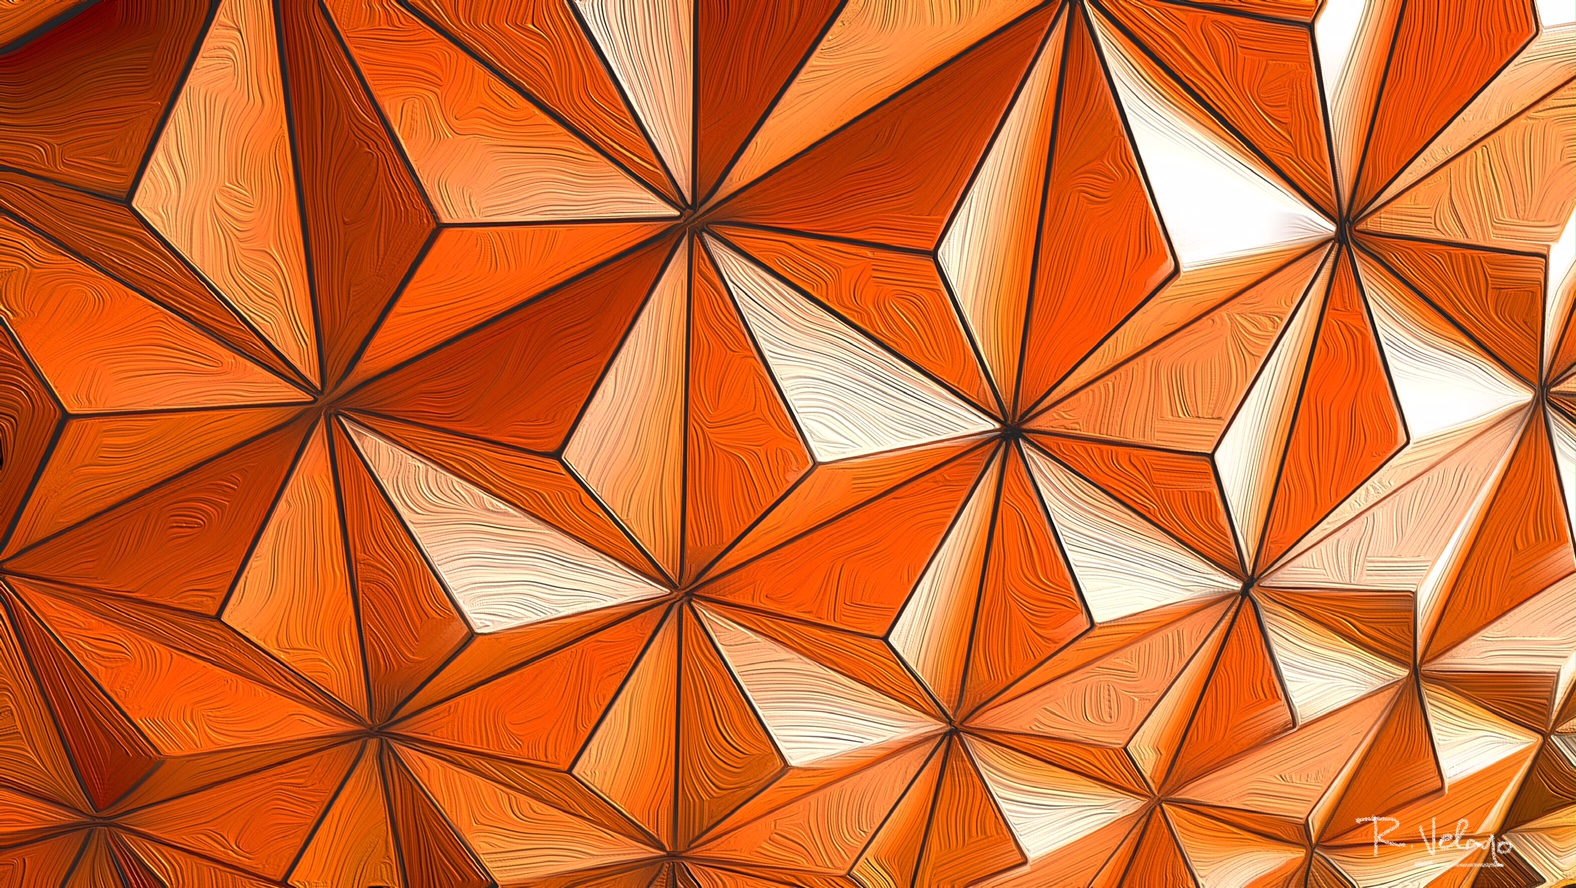 "FACADE OF SPACESHIP EARTH AT EPCOT IN ORANGE" [Created: 1/22/2021]